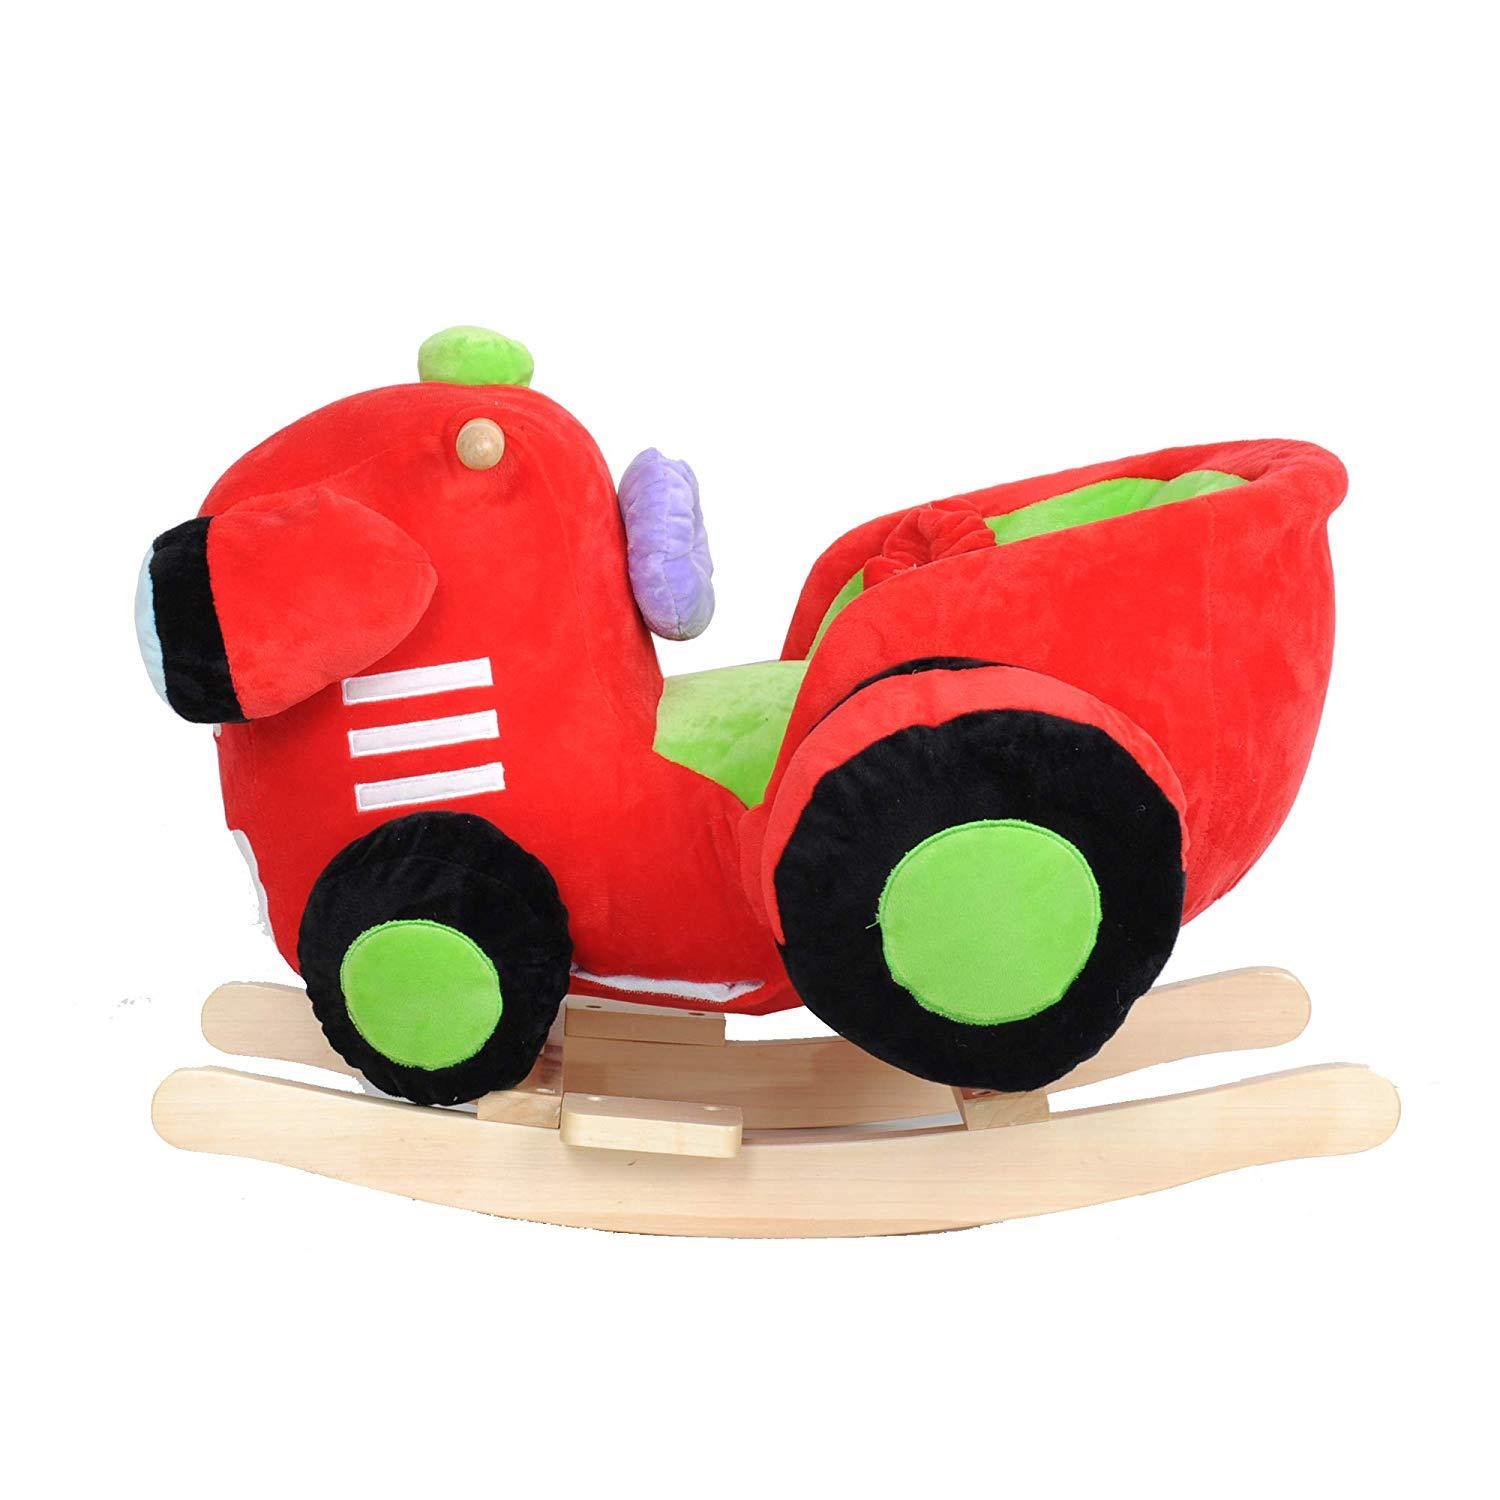 Bosonshop Plush&Wooden Ride On Rocking Horse Play Train for Toddlers